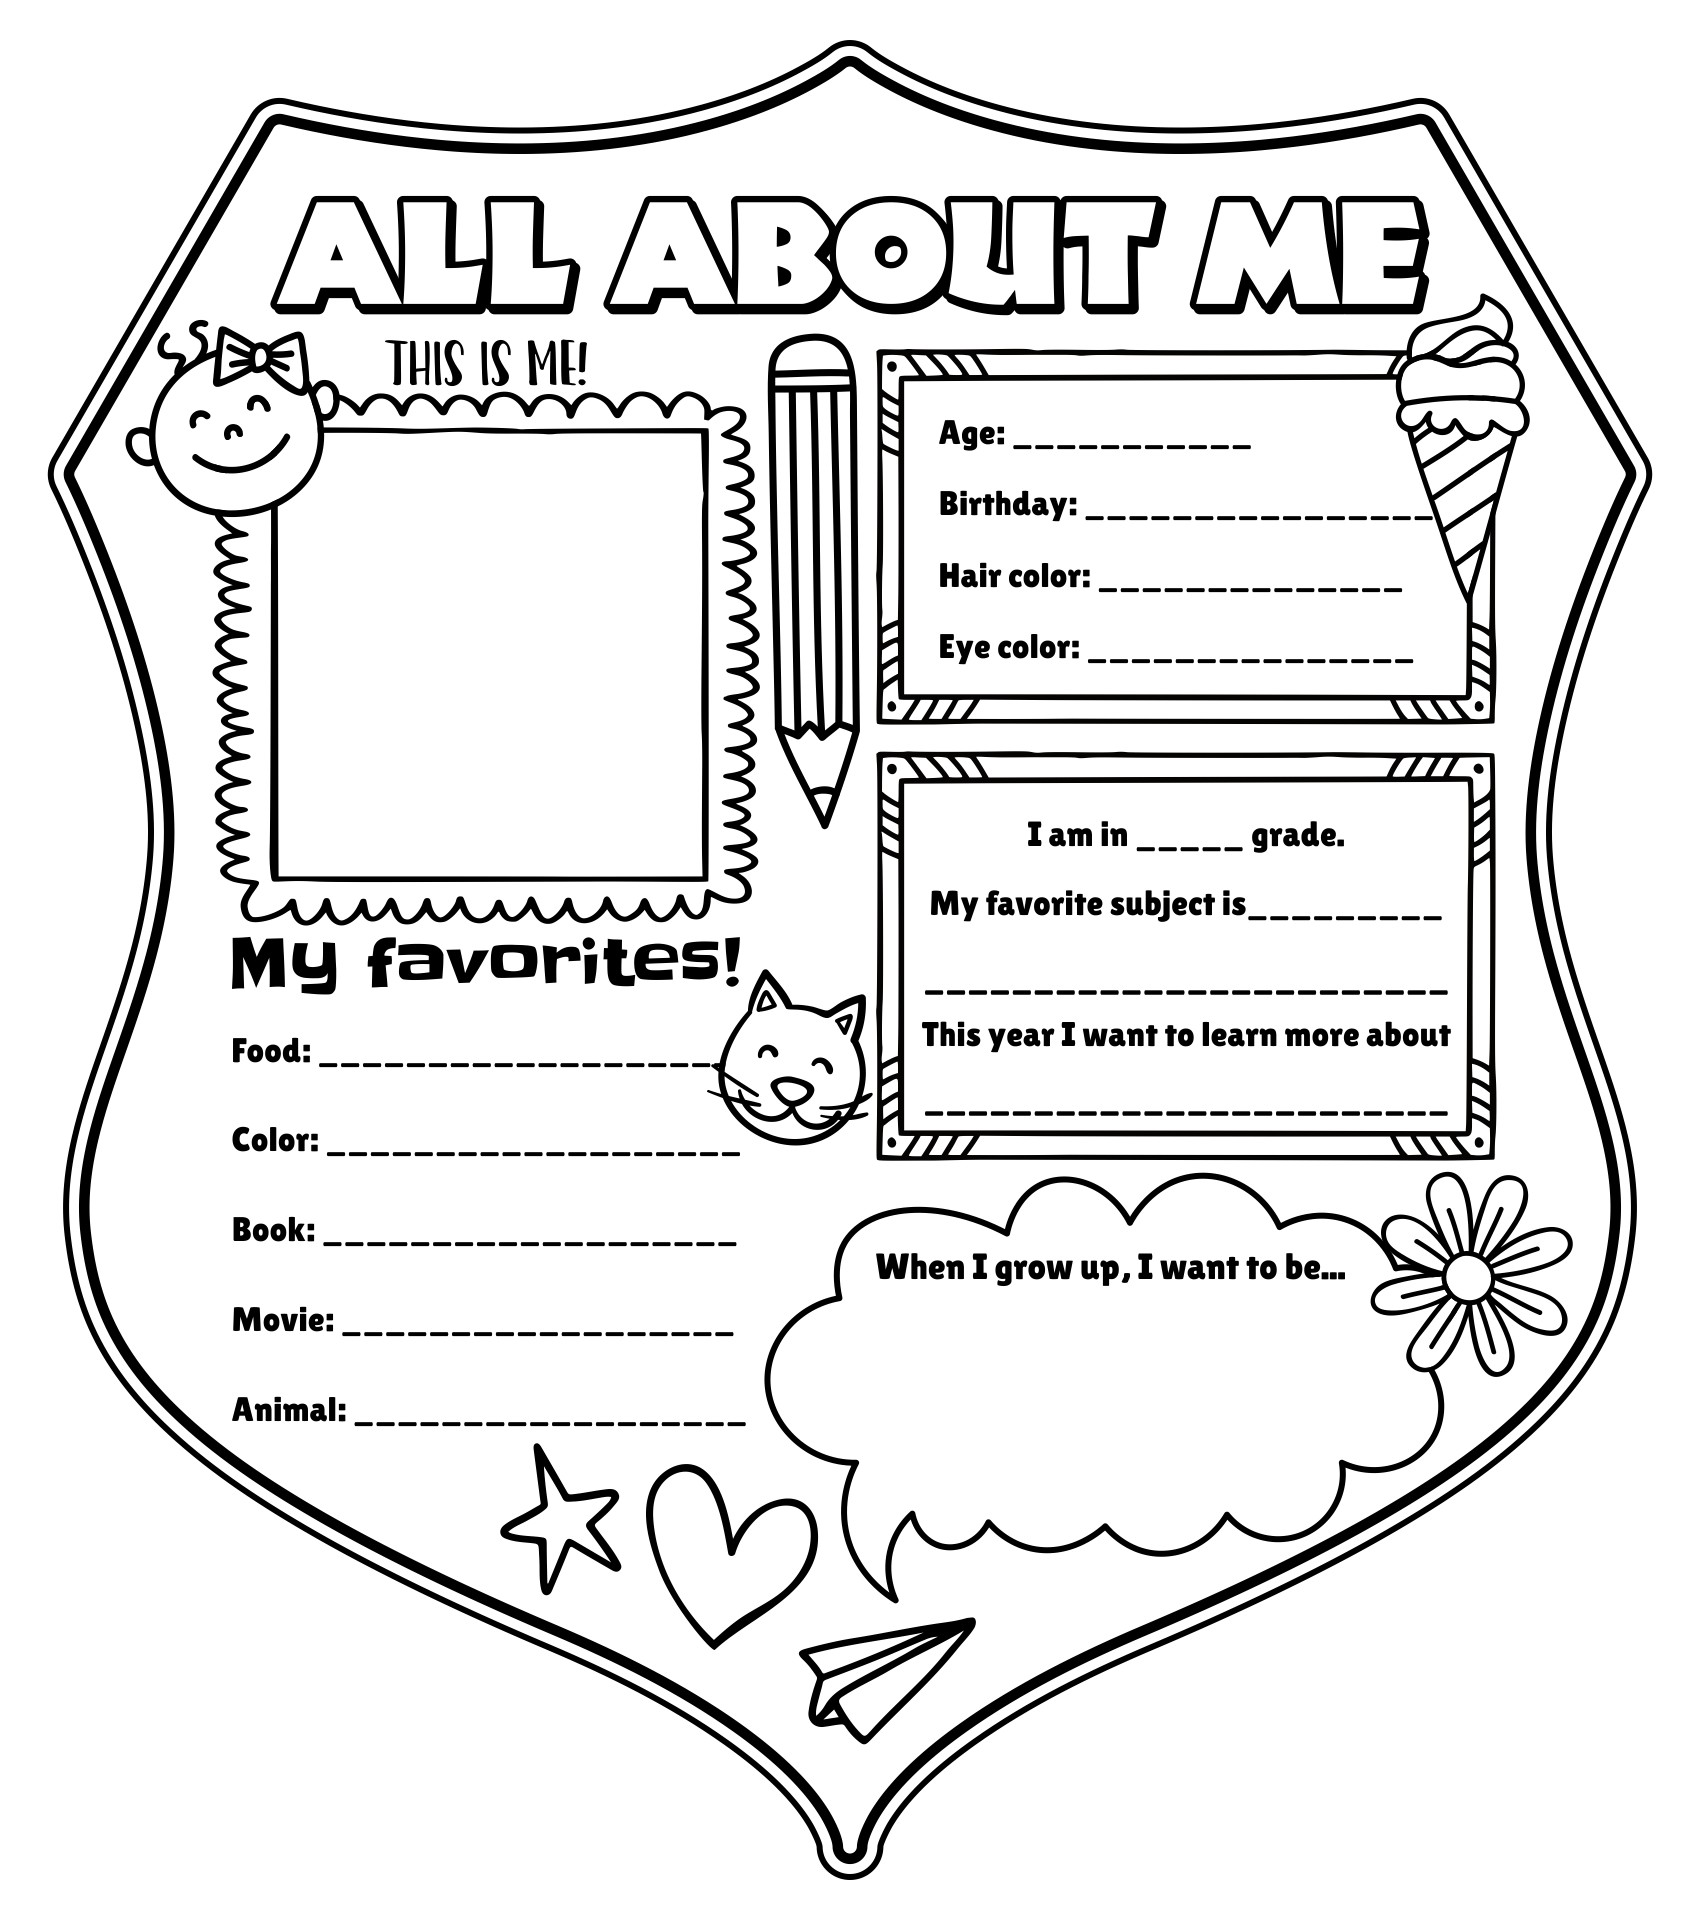 Printable All About Me Badge For Kids